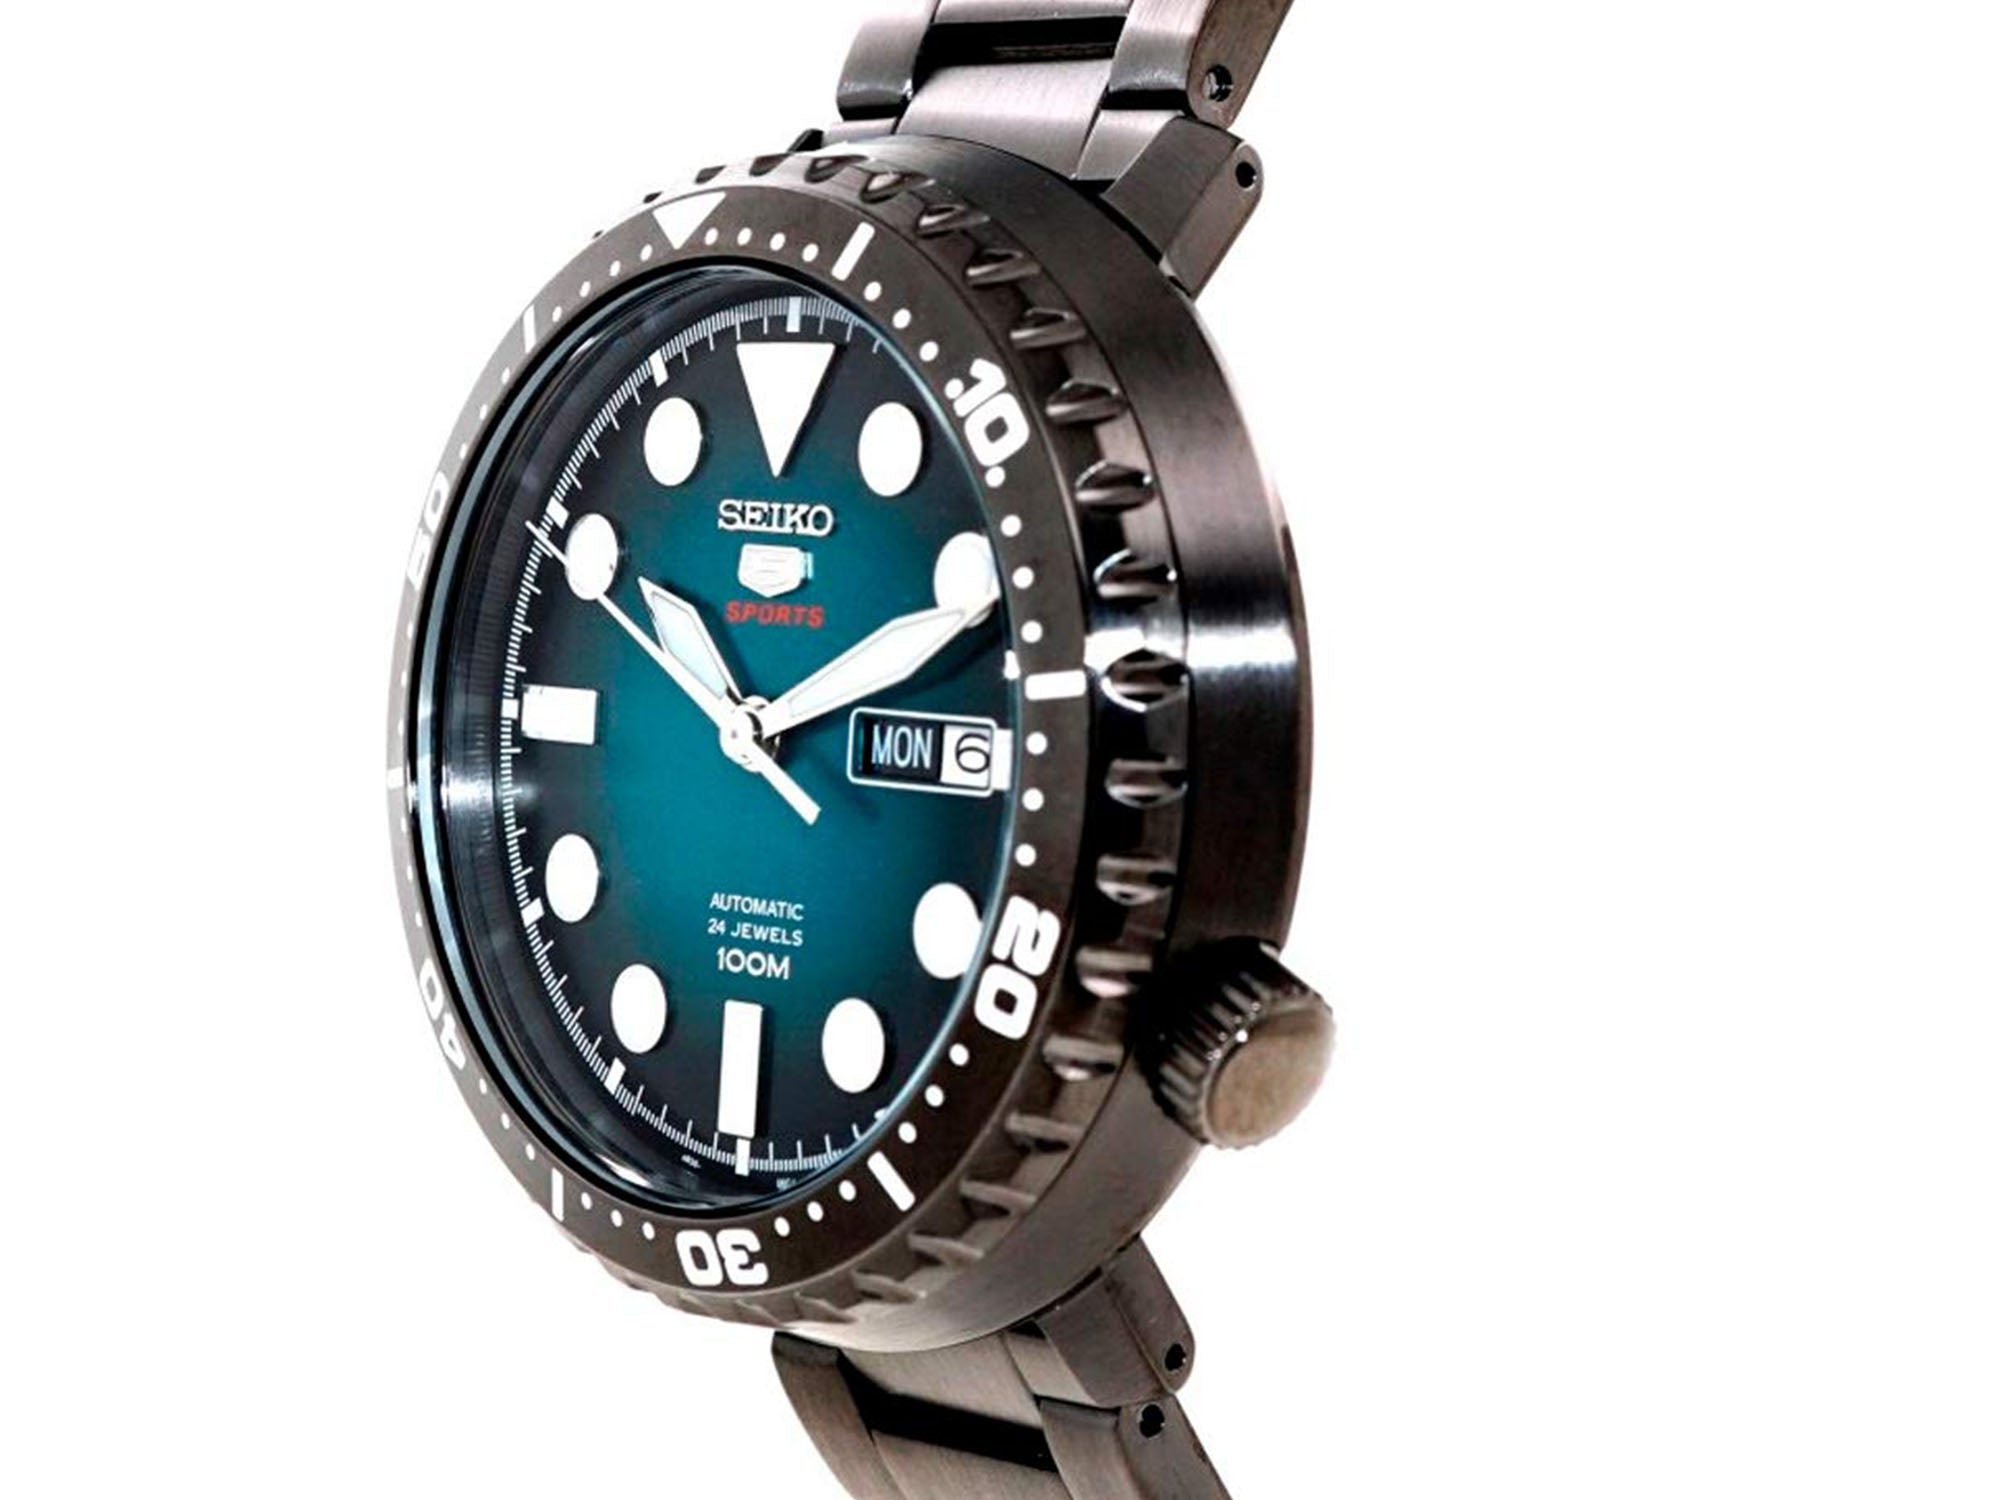 drag hybrid servitrice 20 Seiko 5 Sports Watches: Affordable Divers, Dress Watches and Field |  Teddy Baldassarre